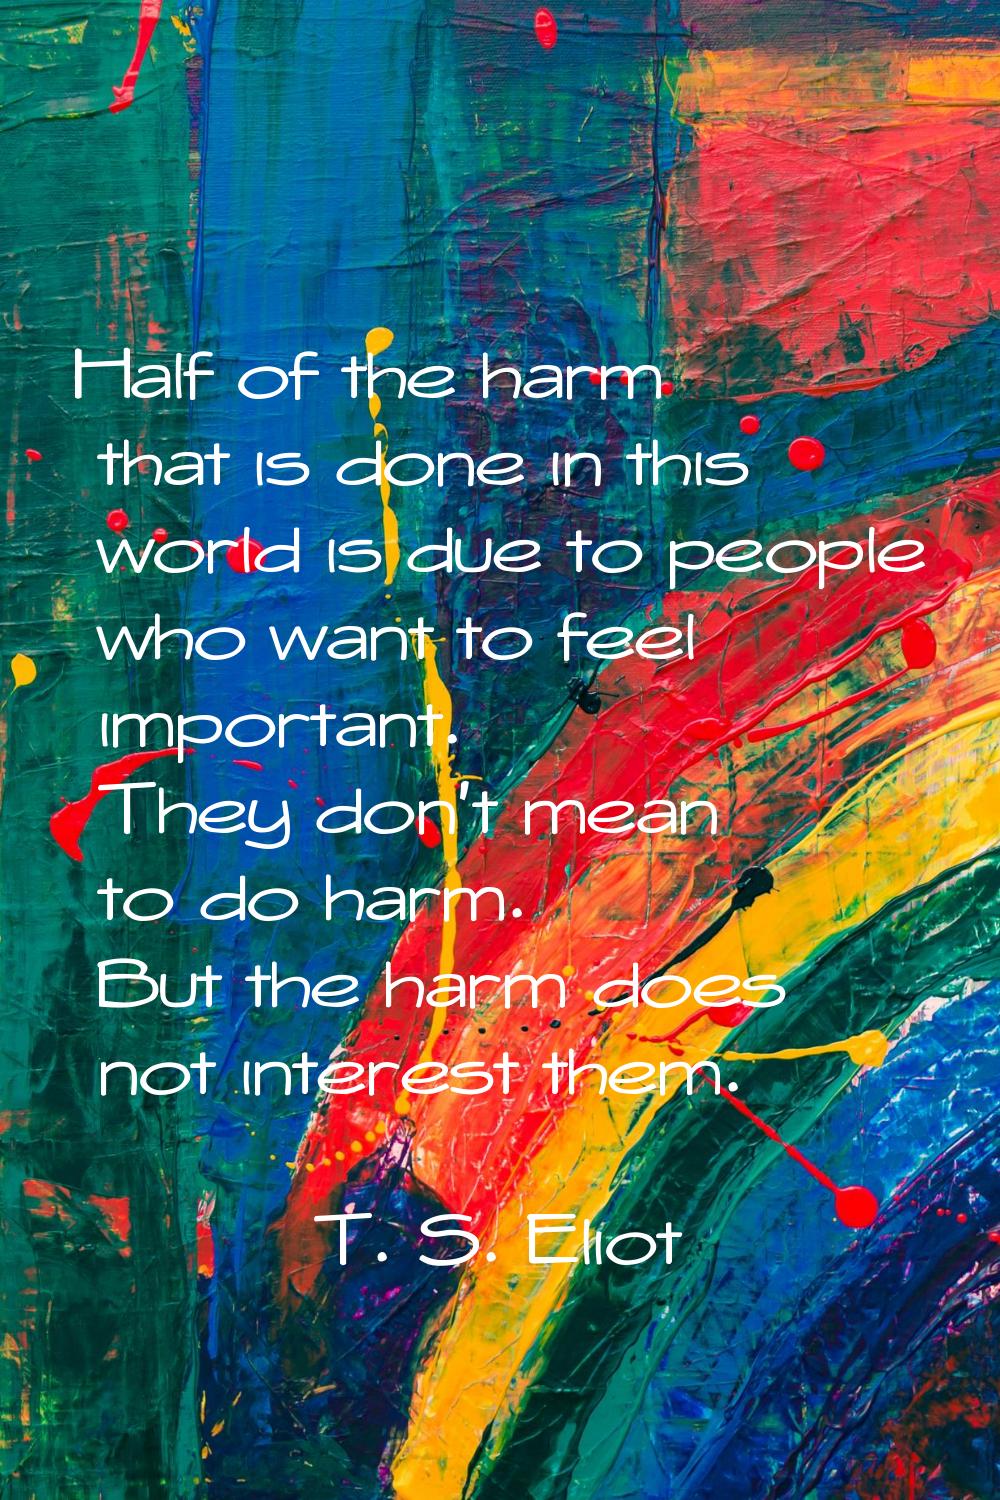 Half of the harm that is done in this world is due to people who want to feel important. They don't